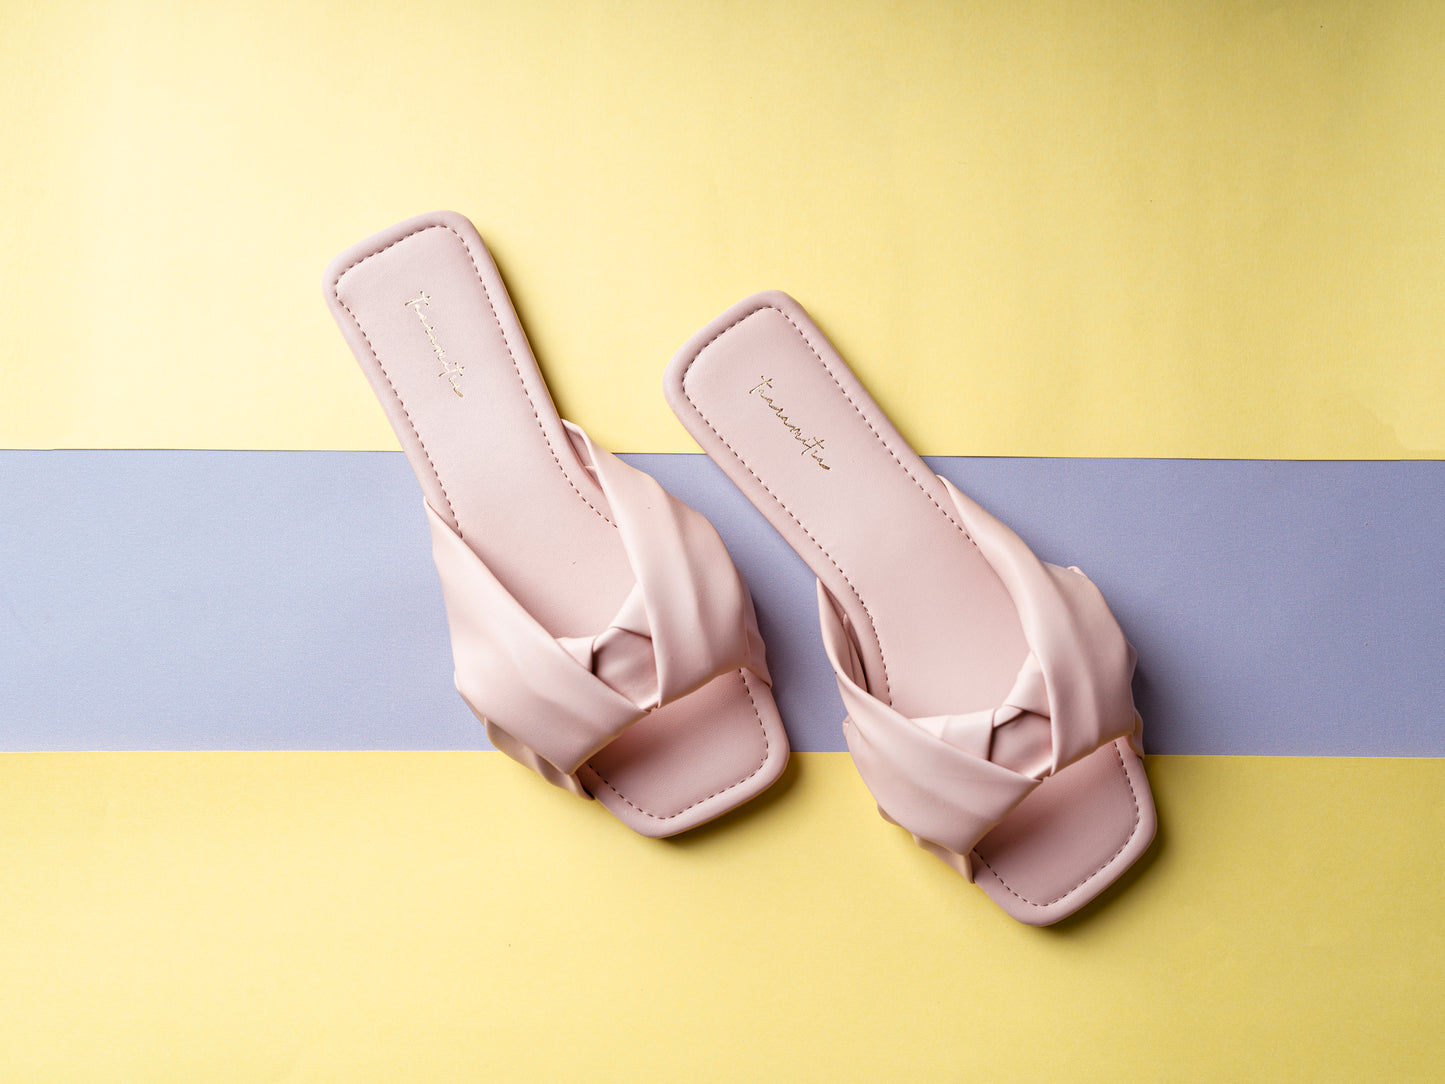 Knotted slider flats in Light peach